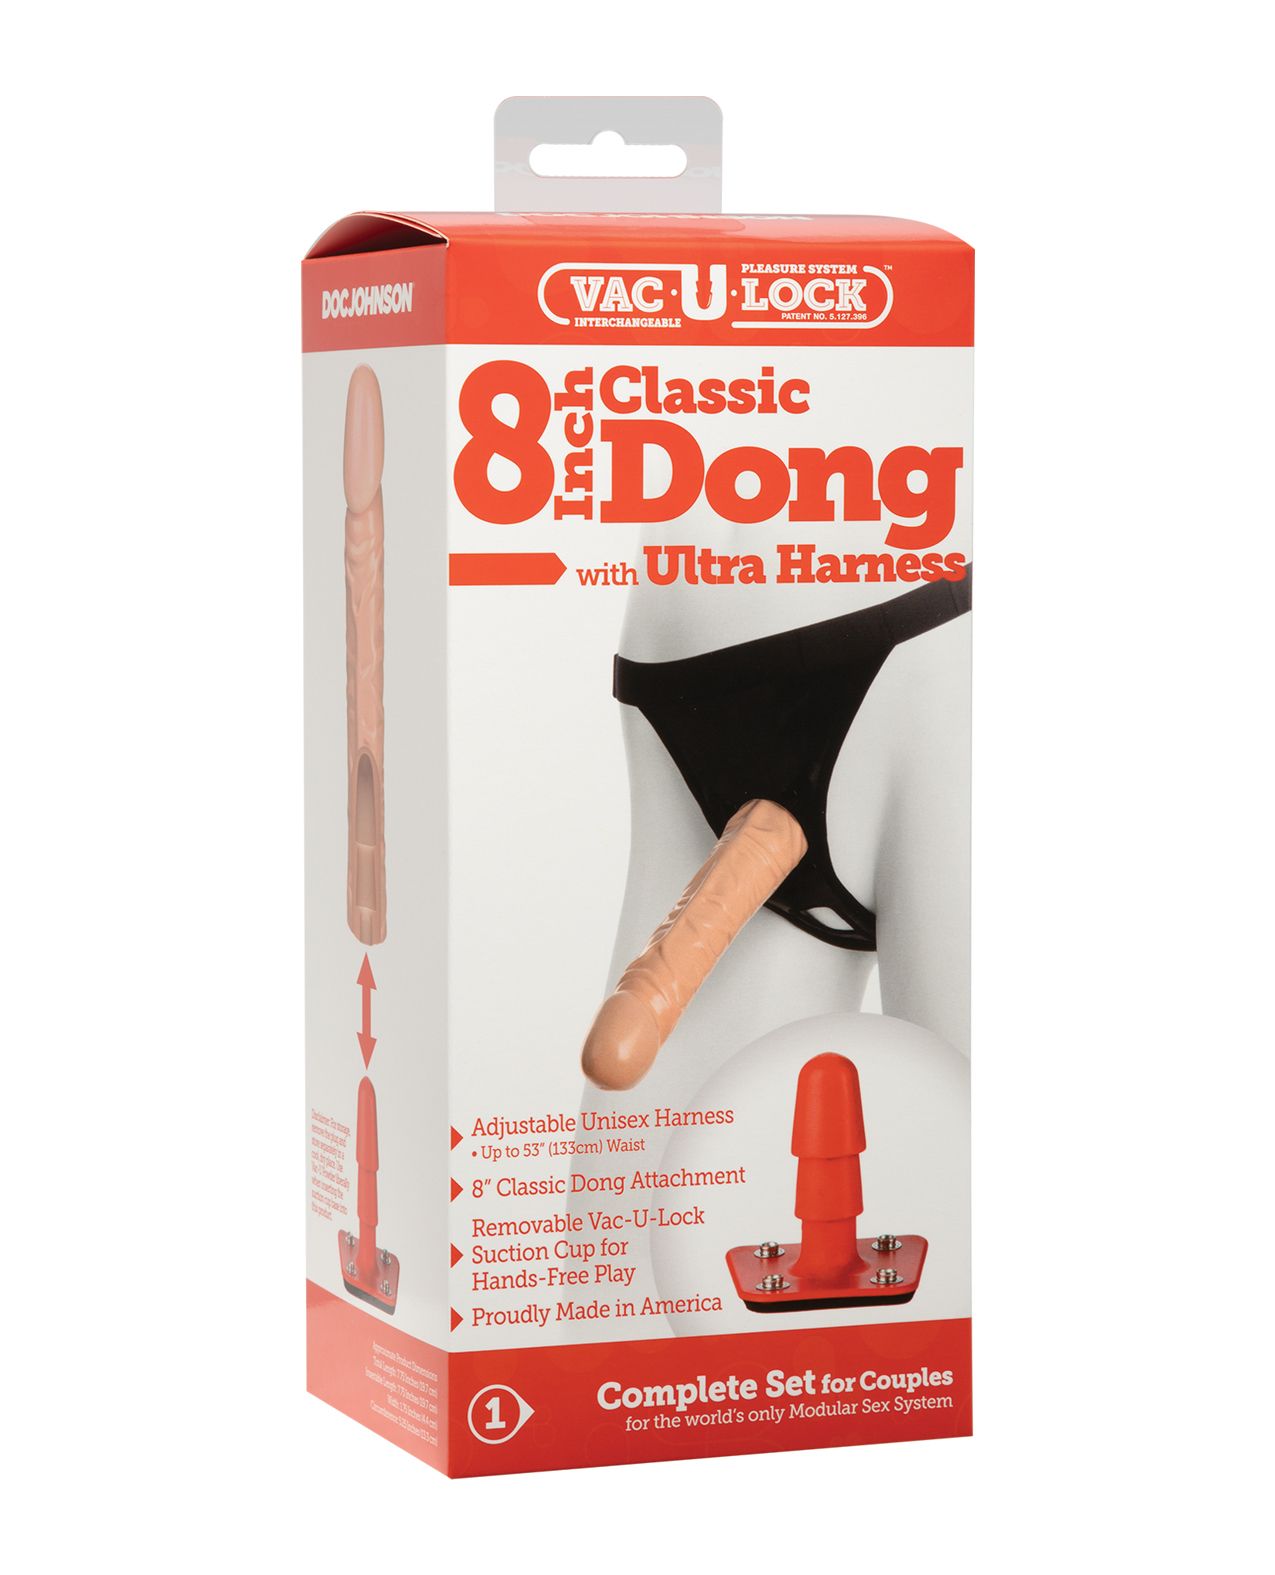 Ultra Harness 2 with 8" Dong Shipmysextoys